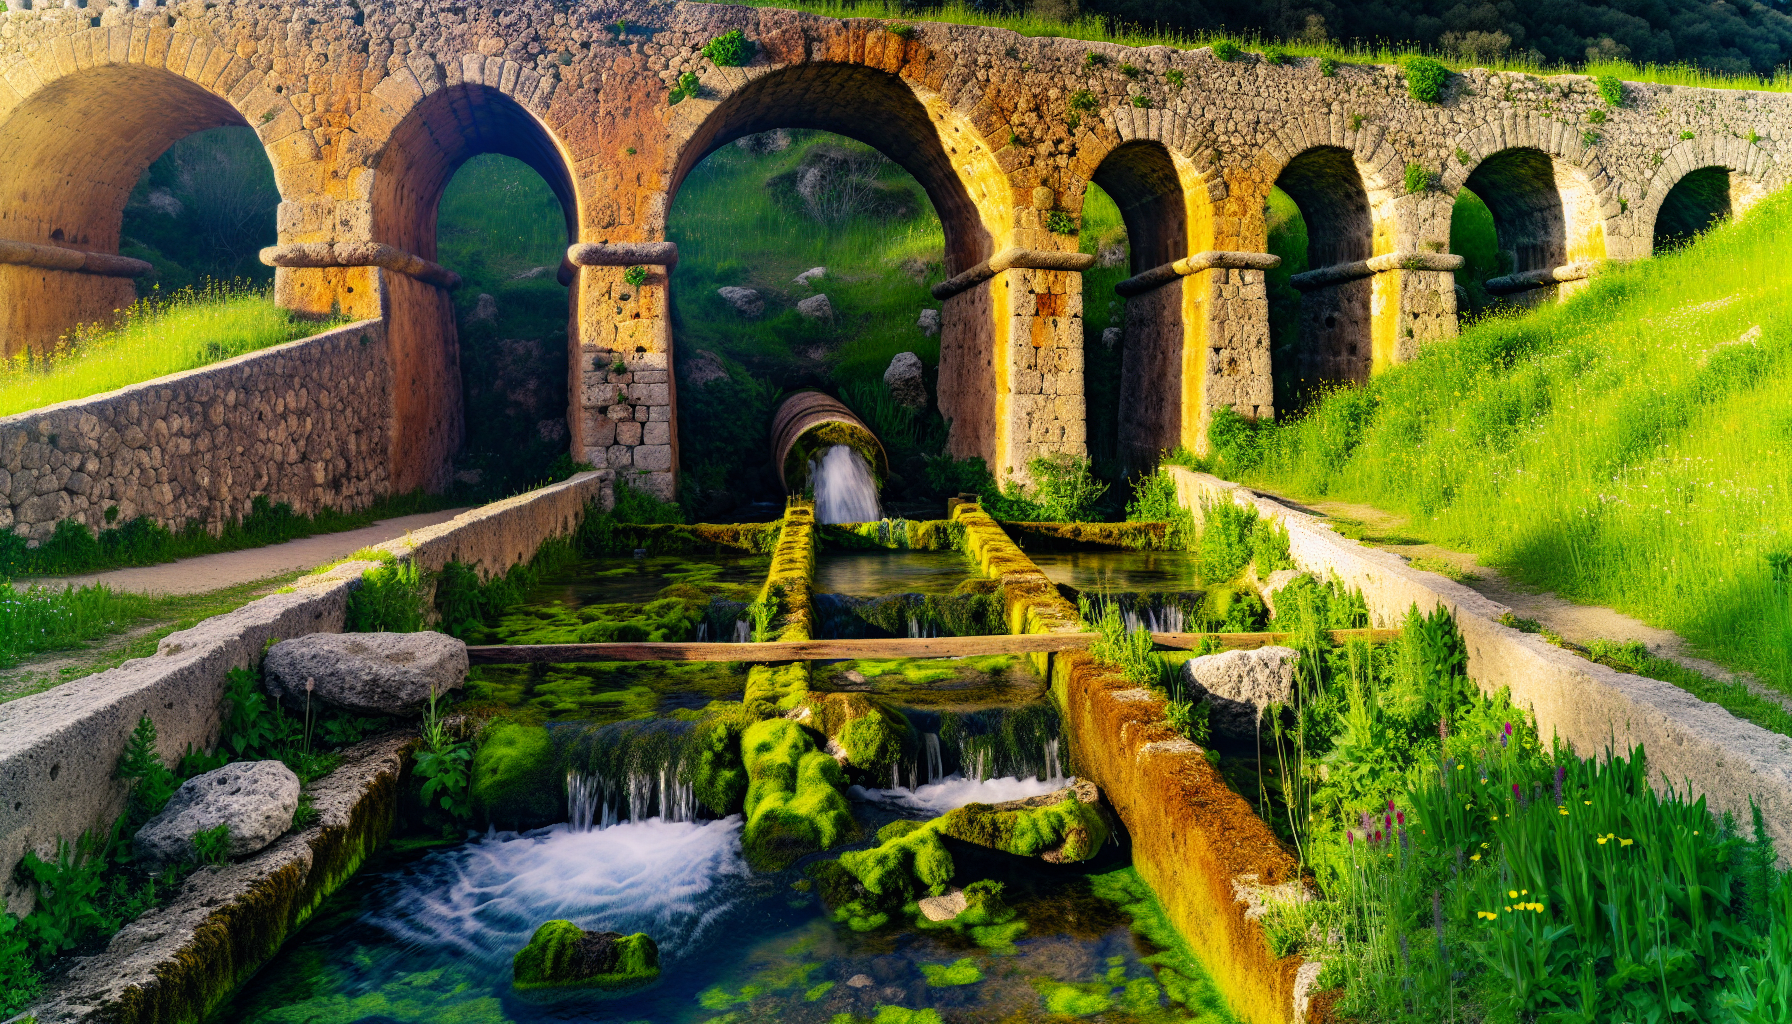 Photo of a Roman aqueduct sourcing water from a spring